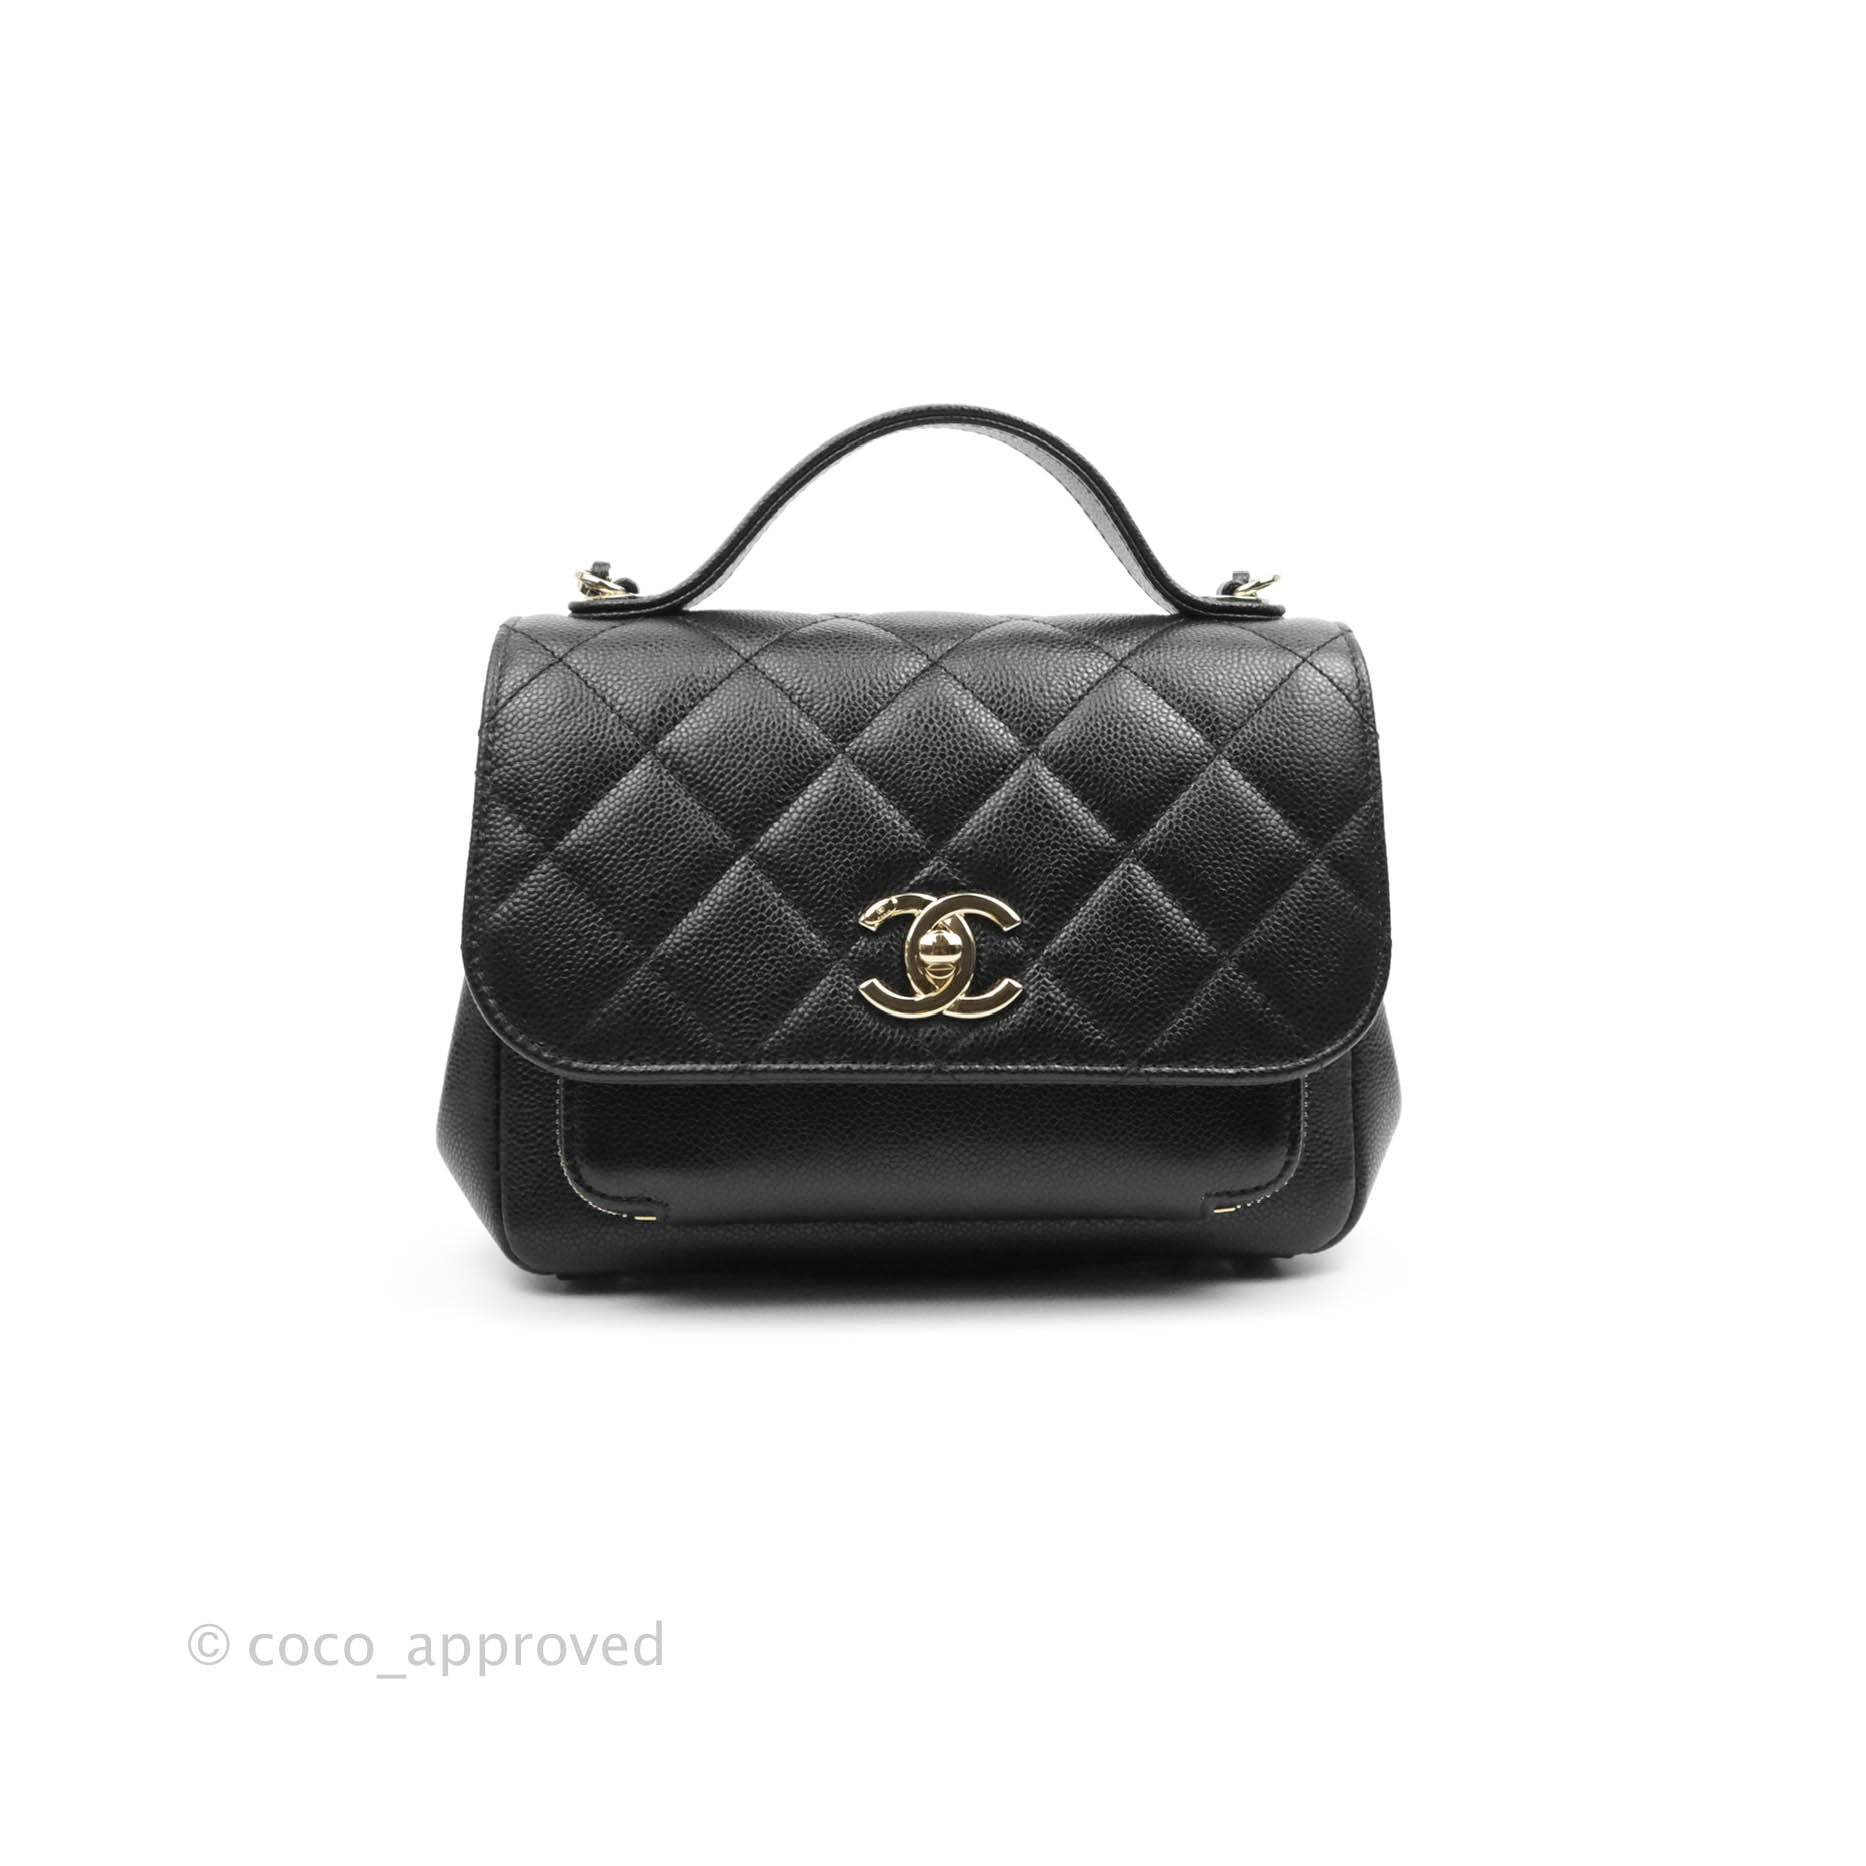 Business Affinity Chanel Bags - Vestiaire Collective